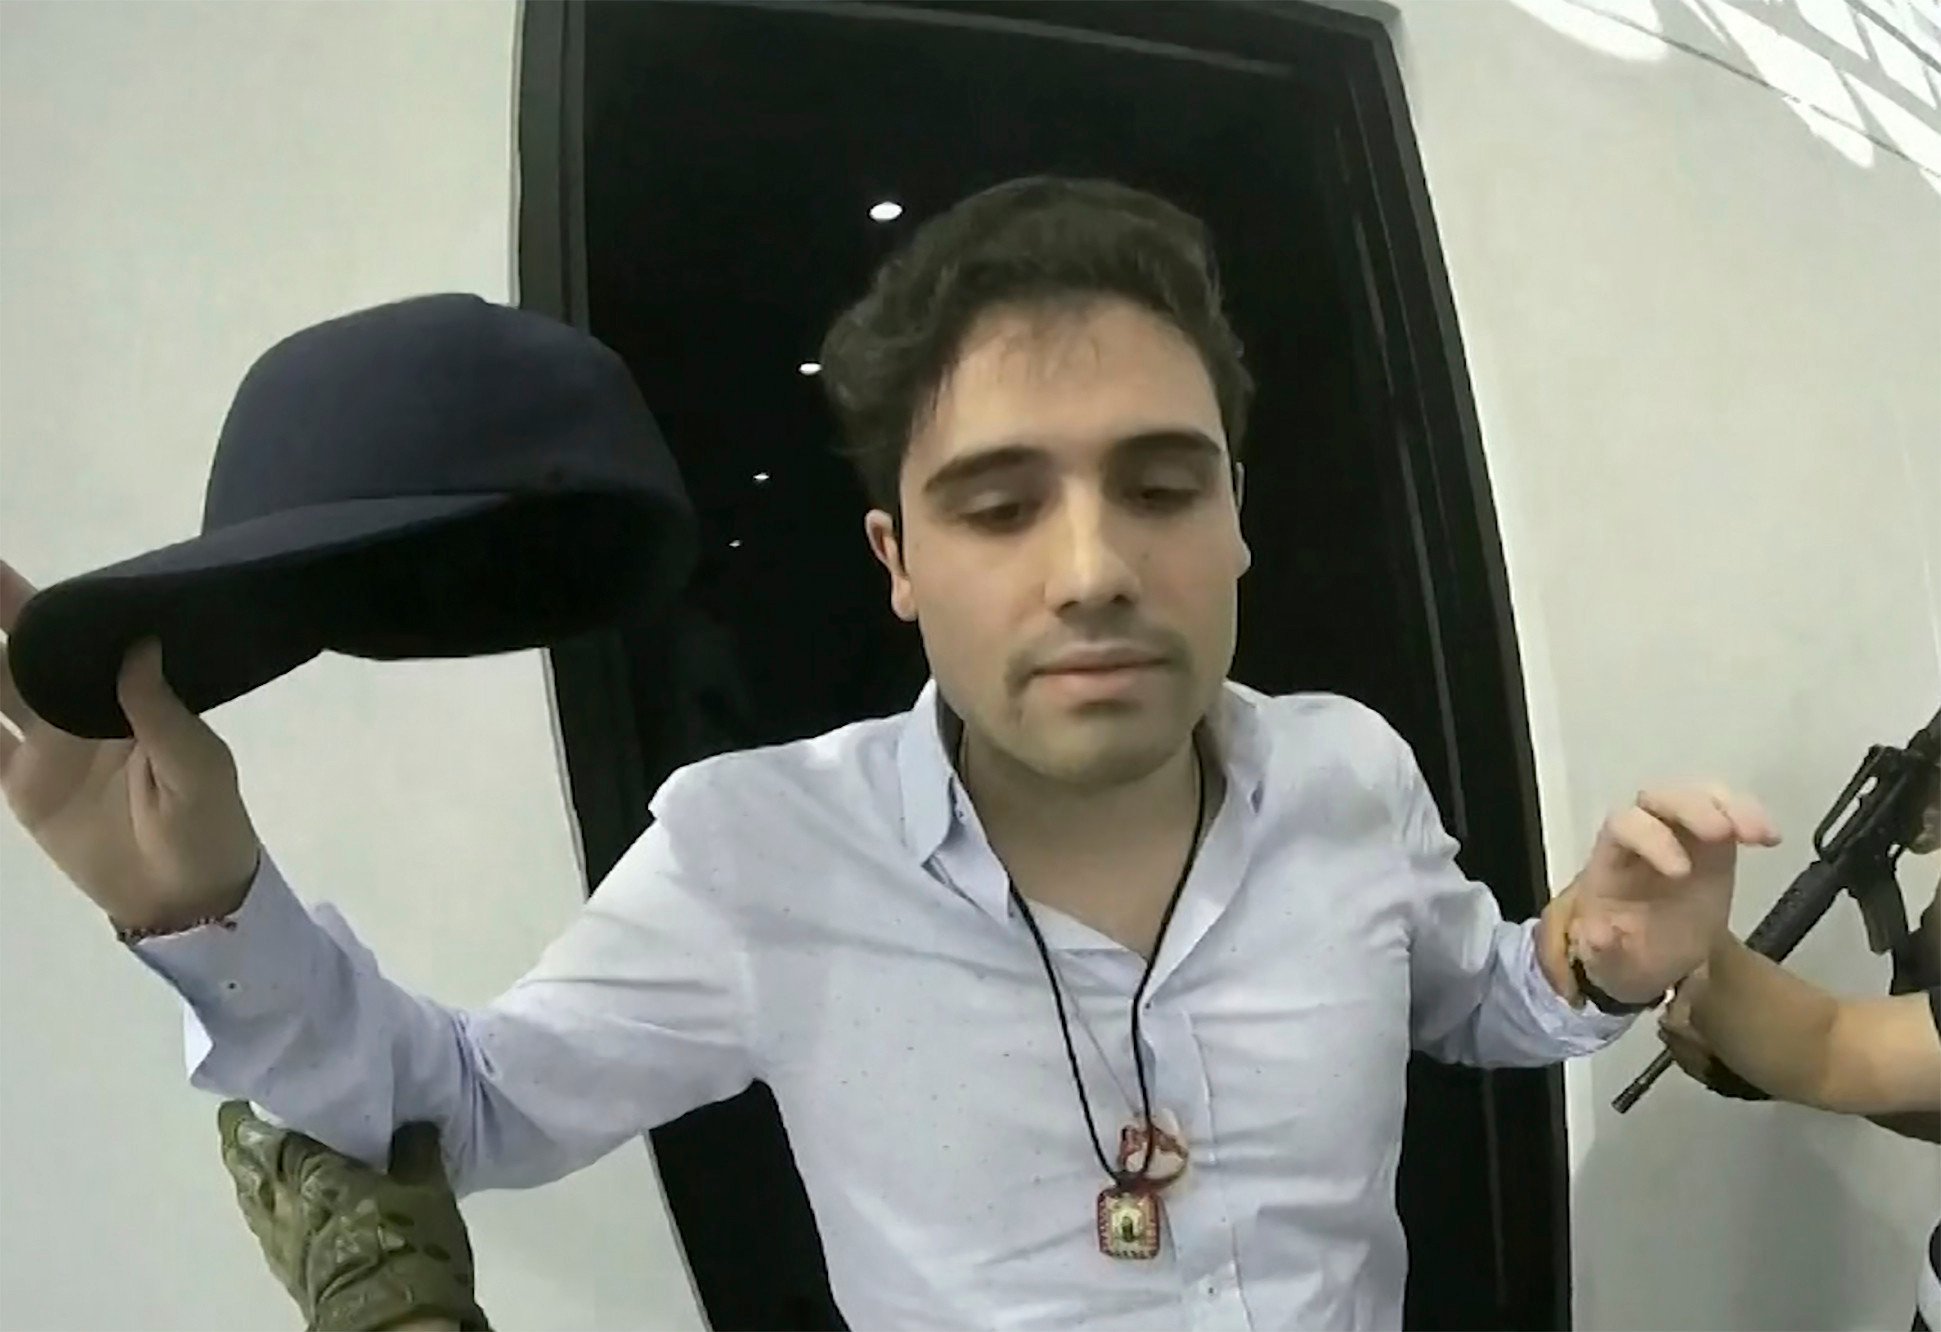 A screen grab from video, provided by the Mexican government, shows Ovidio Guzman being detained in Culiacan, Mexico in 2019. Guzman pleaded not guilty to US fentanyl trafficking charges on Monday. Photo: CEPROPIE via AP 